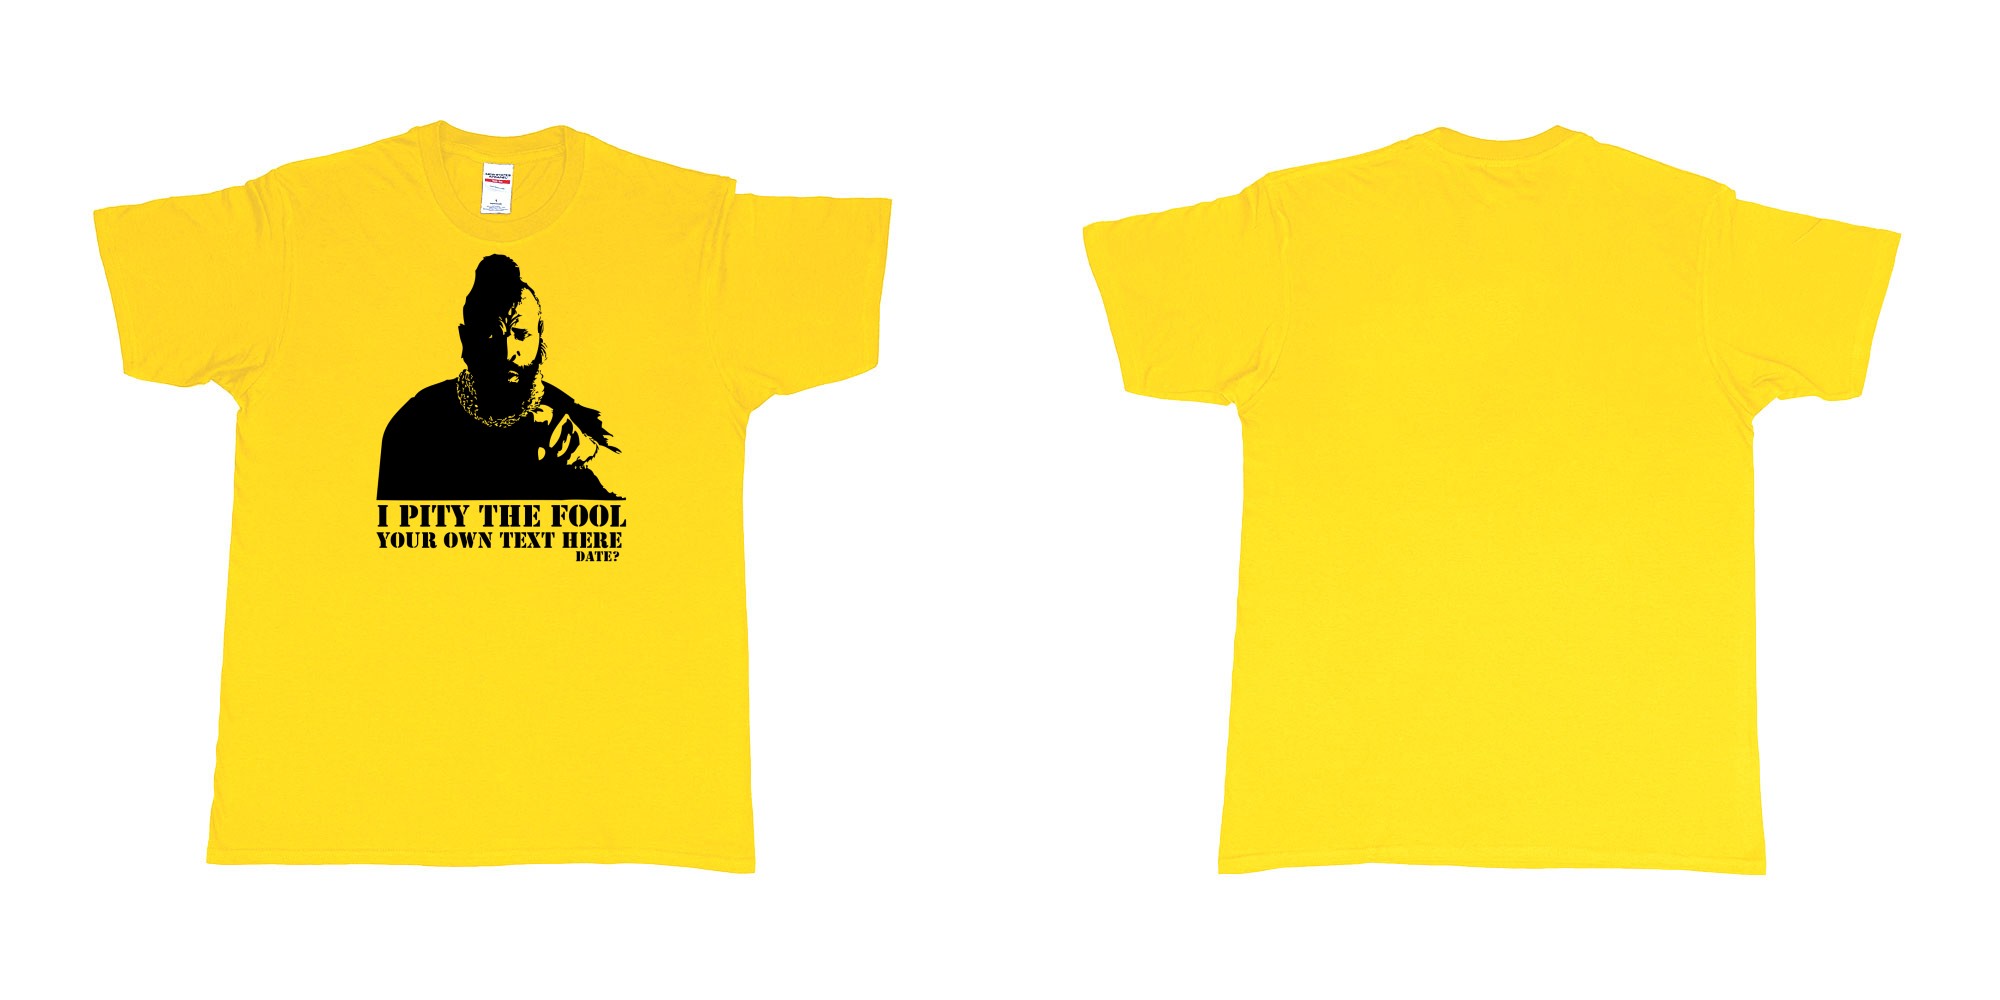 Custom tshirt design I pity the fool in fabric color daisy choice your own text made in Bali by The Pirate Way